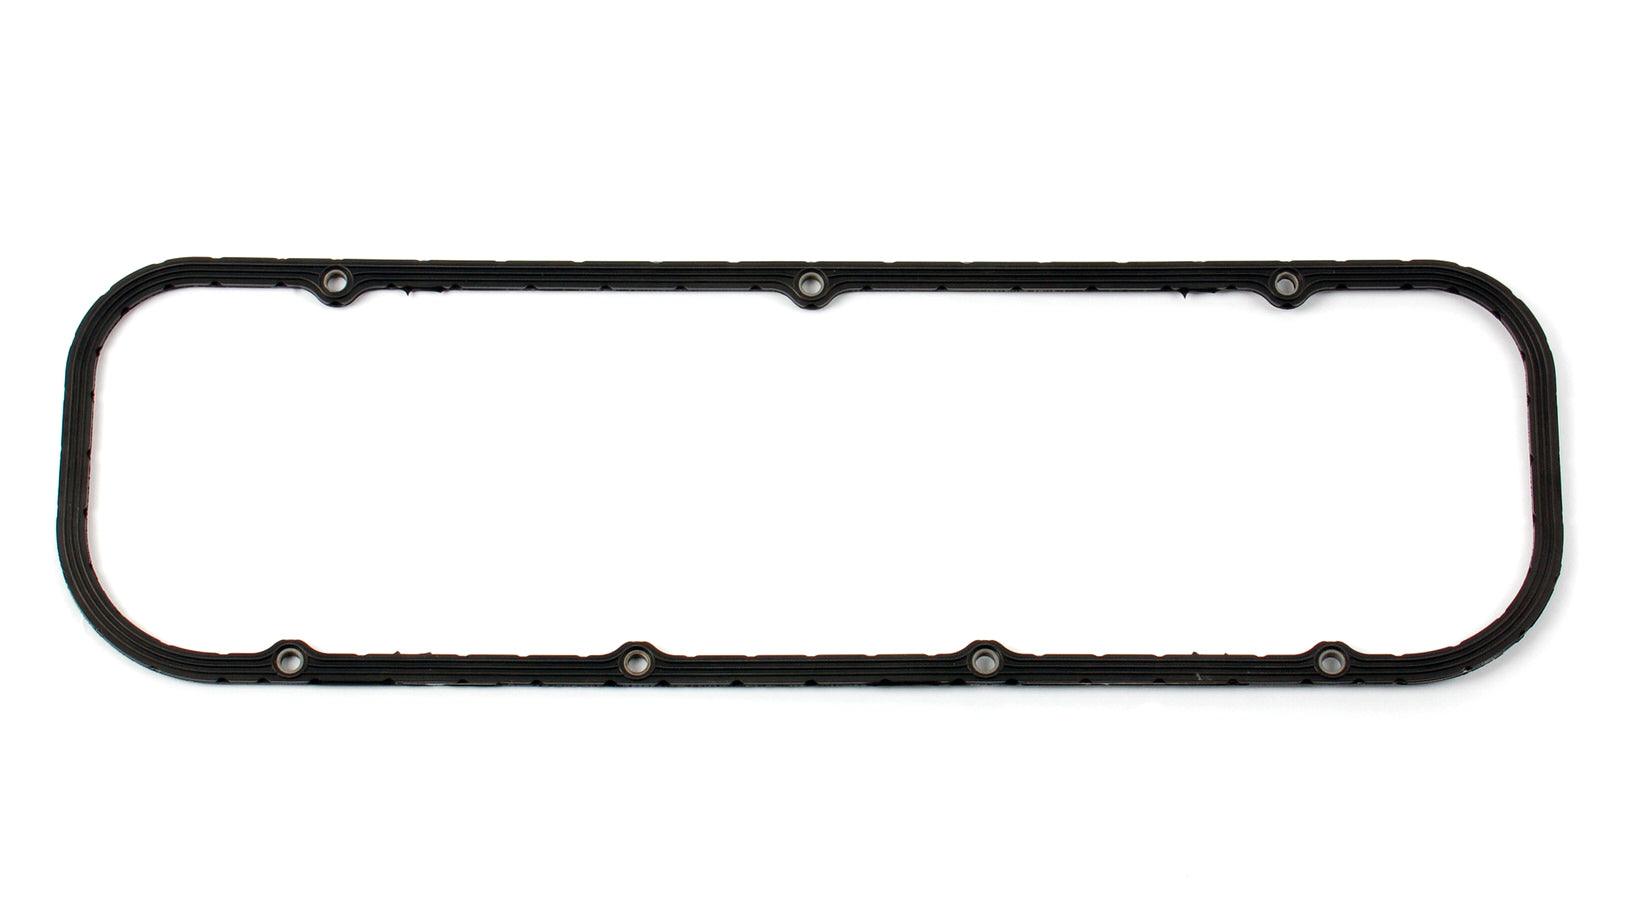 BBC Valve Cover Gasket (1pk) Molded Rubber - Burlile Performance Products